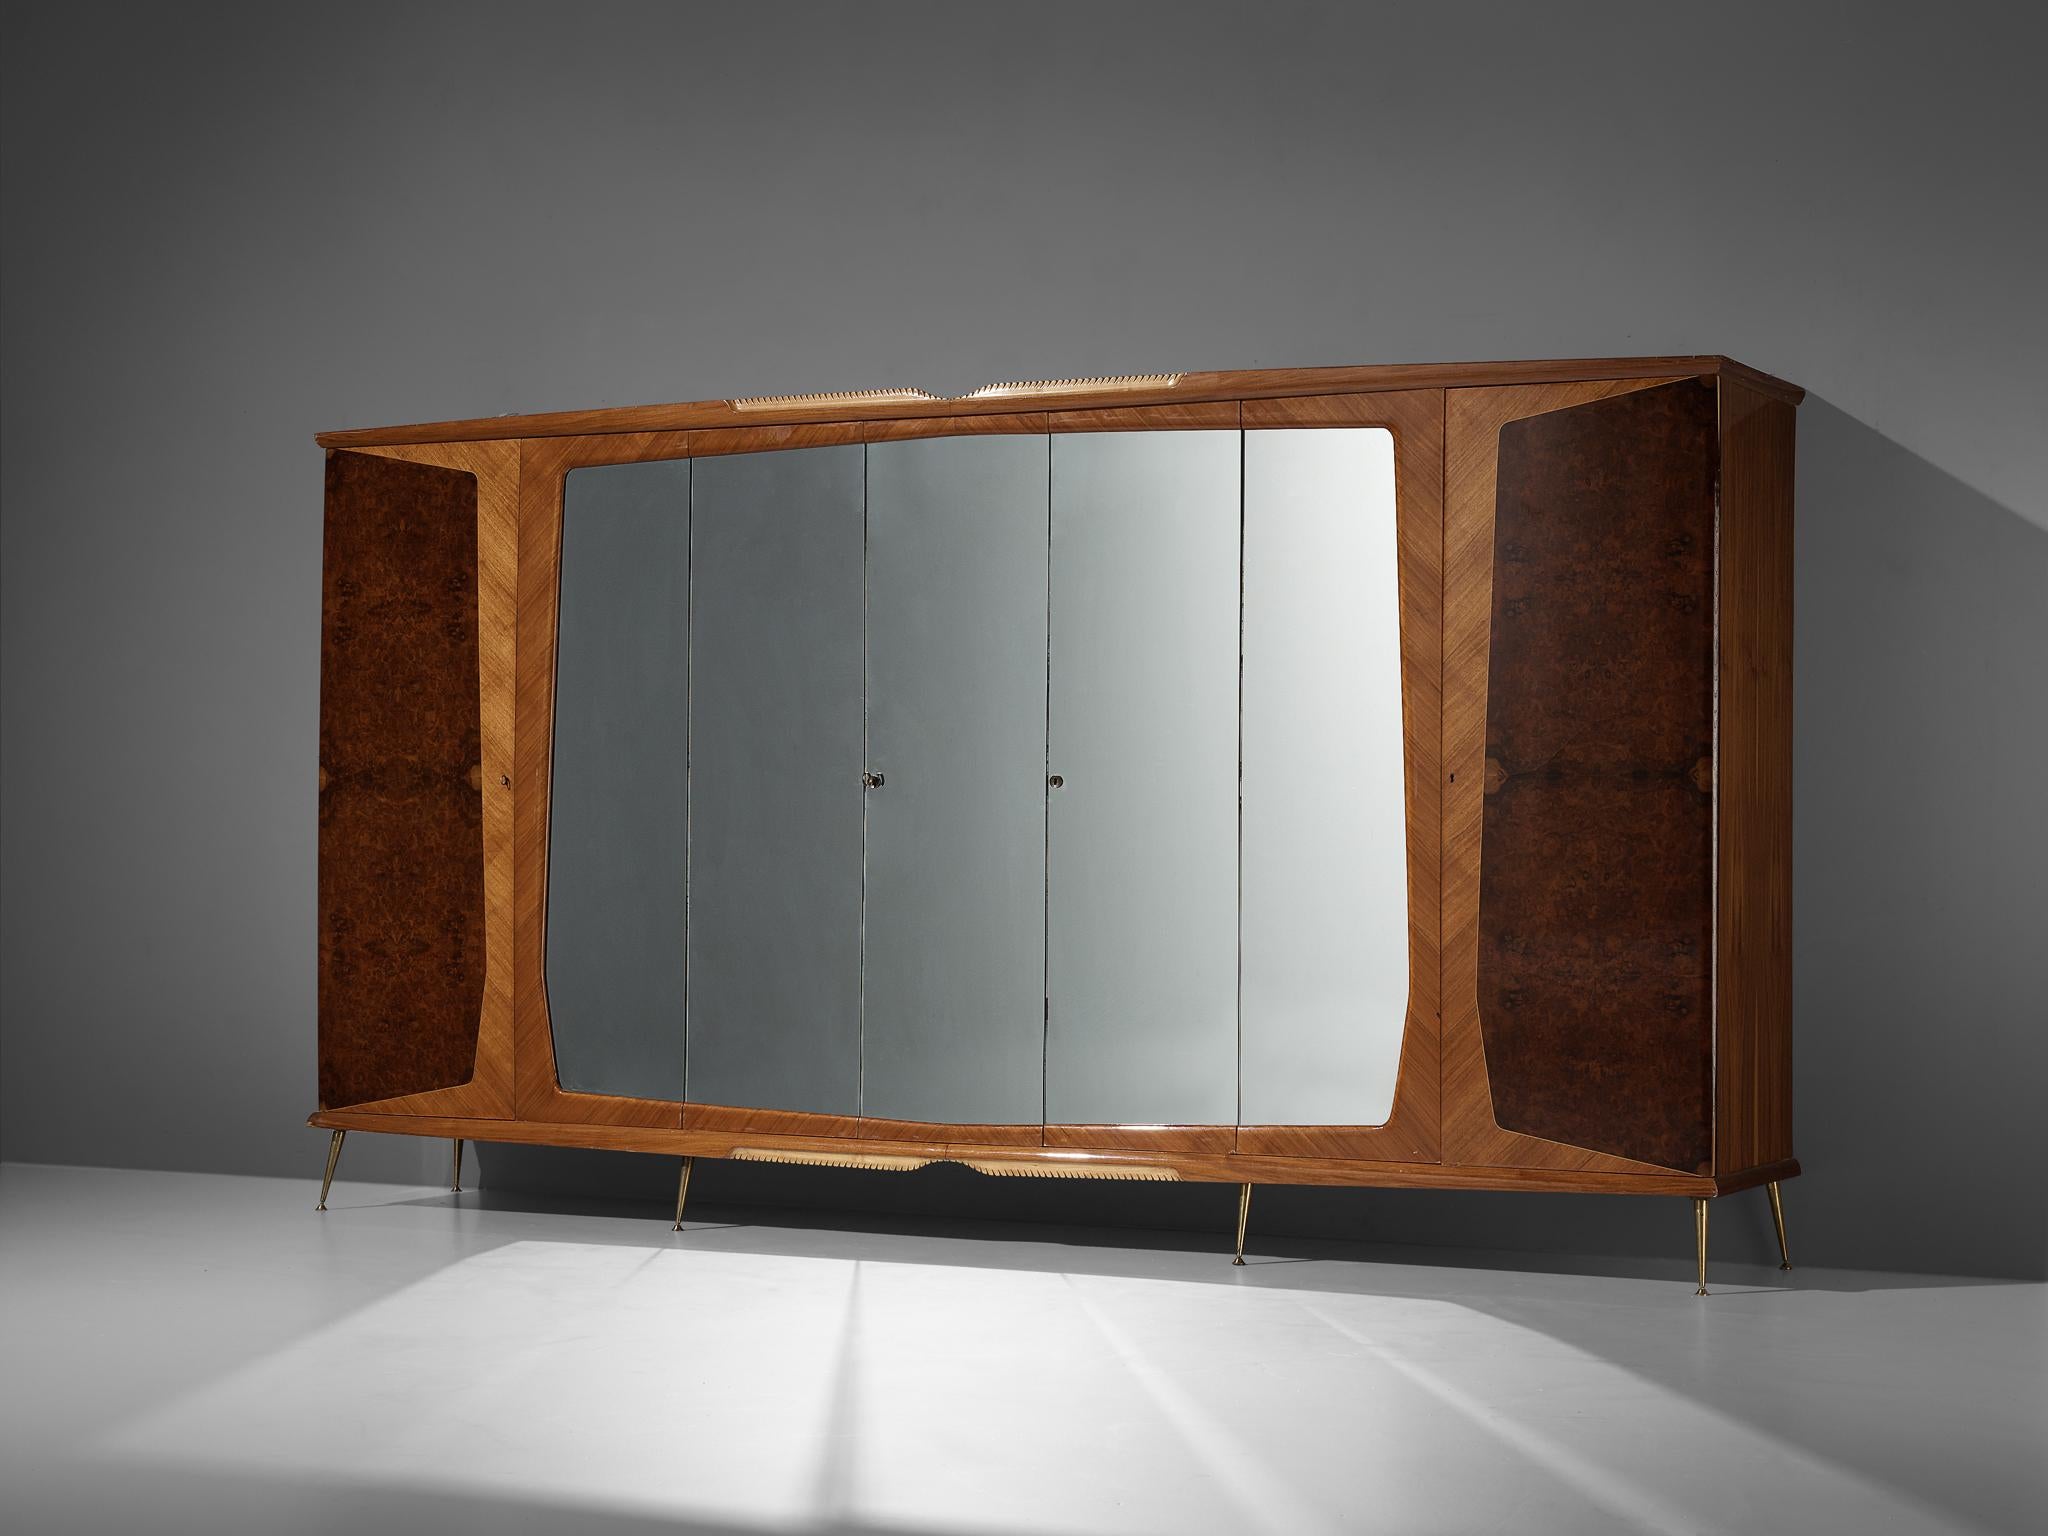 Wardrobe, walnut burl and veneer, mirrored glass, glass, brass, Italy, 1950s

A beautiful and luxurious Italian wardrobe or very large cabinet. With its seven doors this wardrobe has an impressive size. Five doors hold a mirrored surface, the two